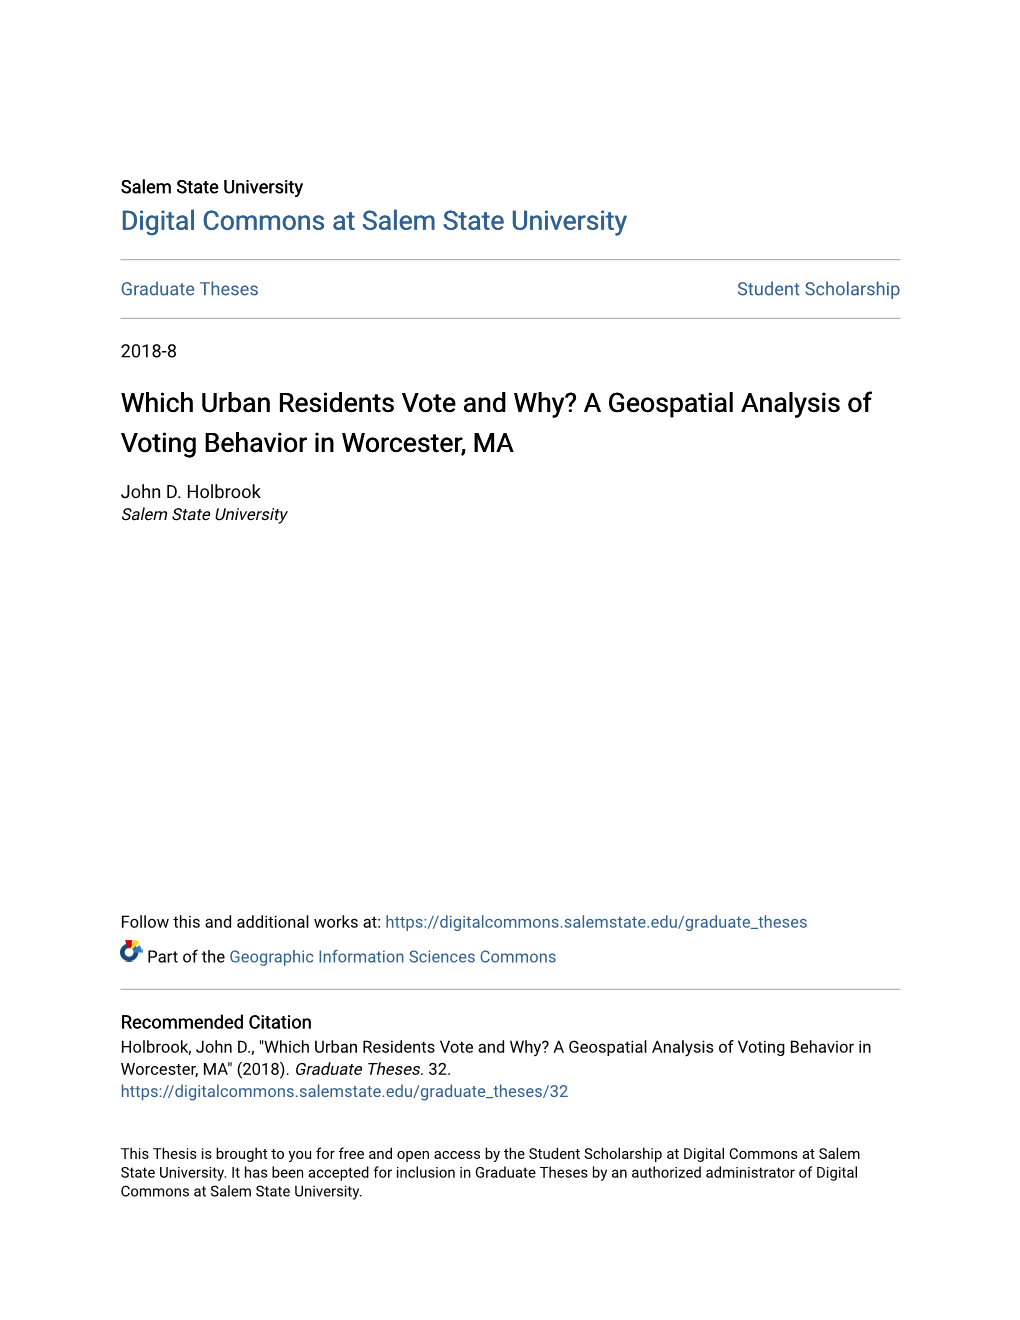 A Geospatial Analysis of Voting Behavior in Worcester, MA